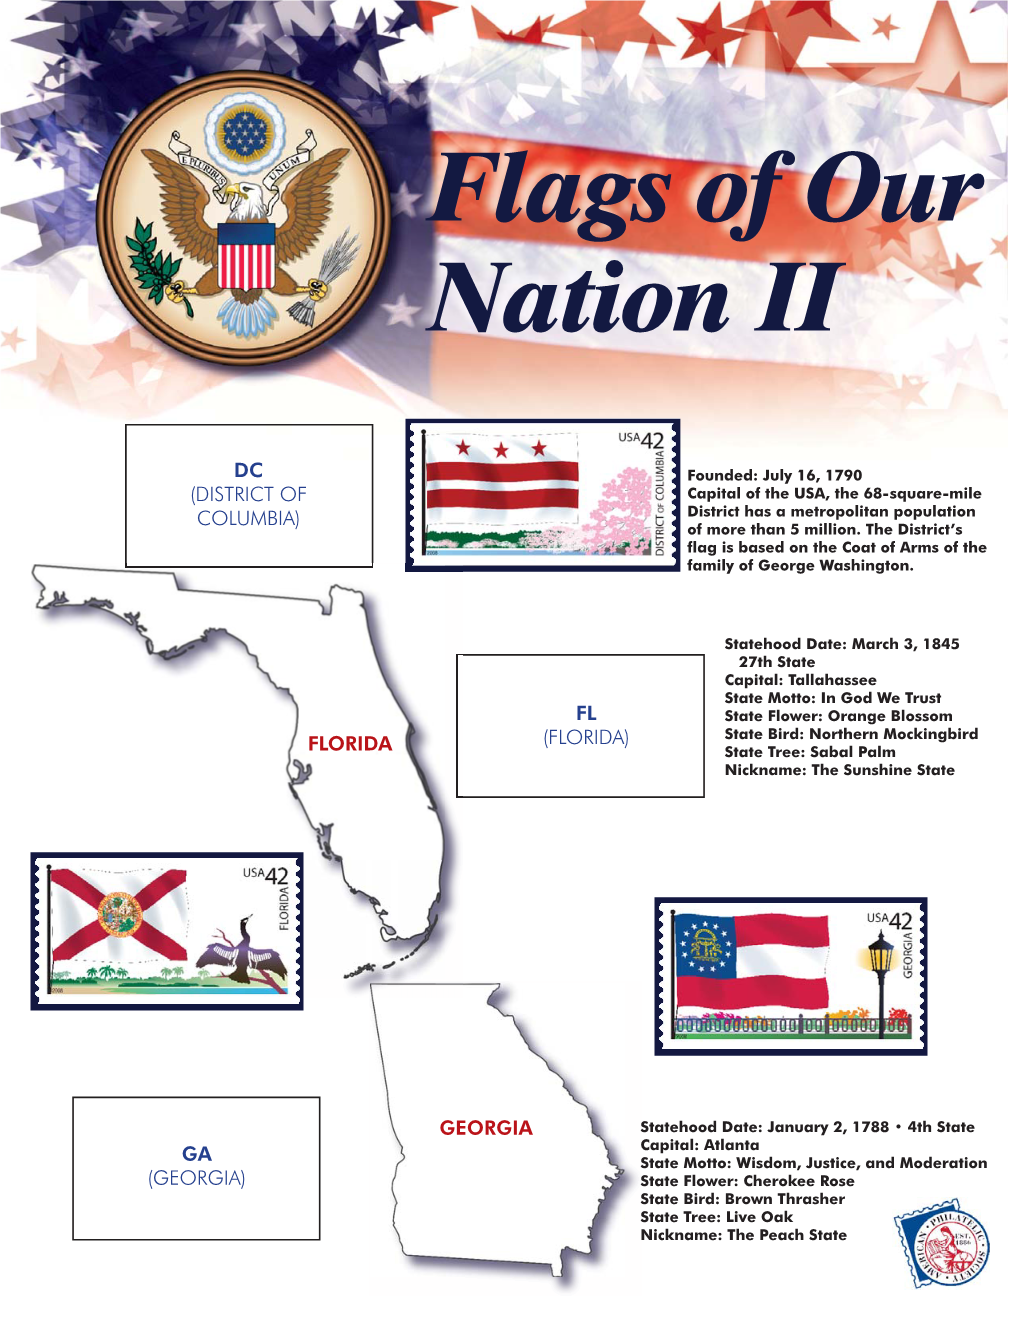 Flags of Our Nation II.Indd